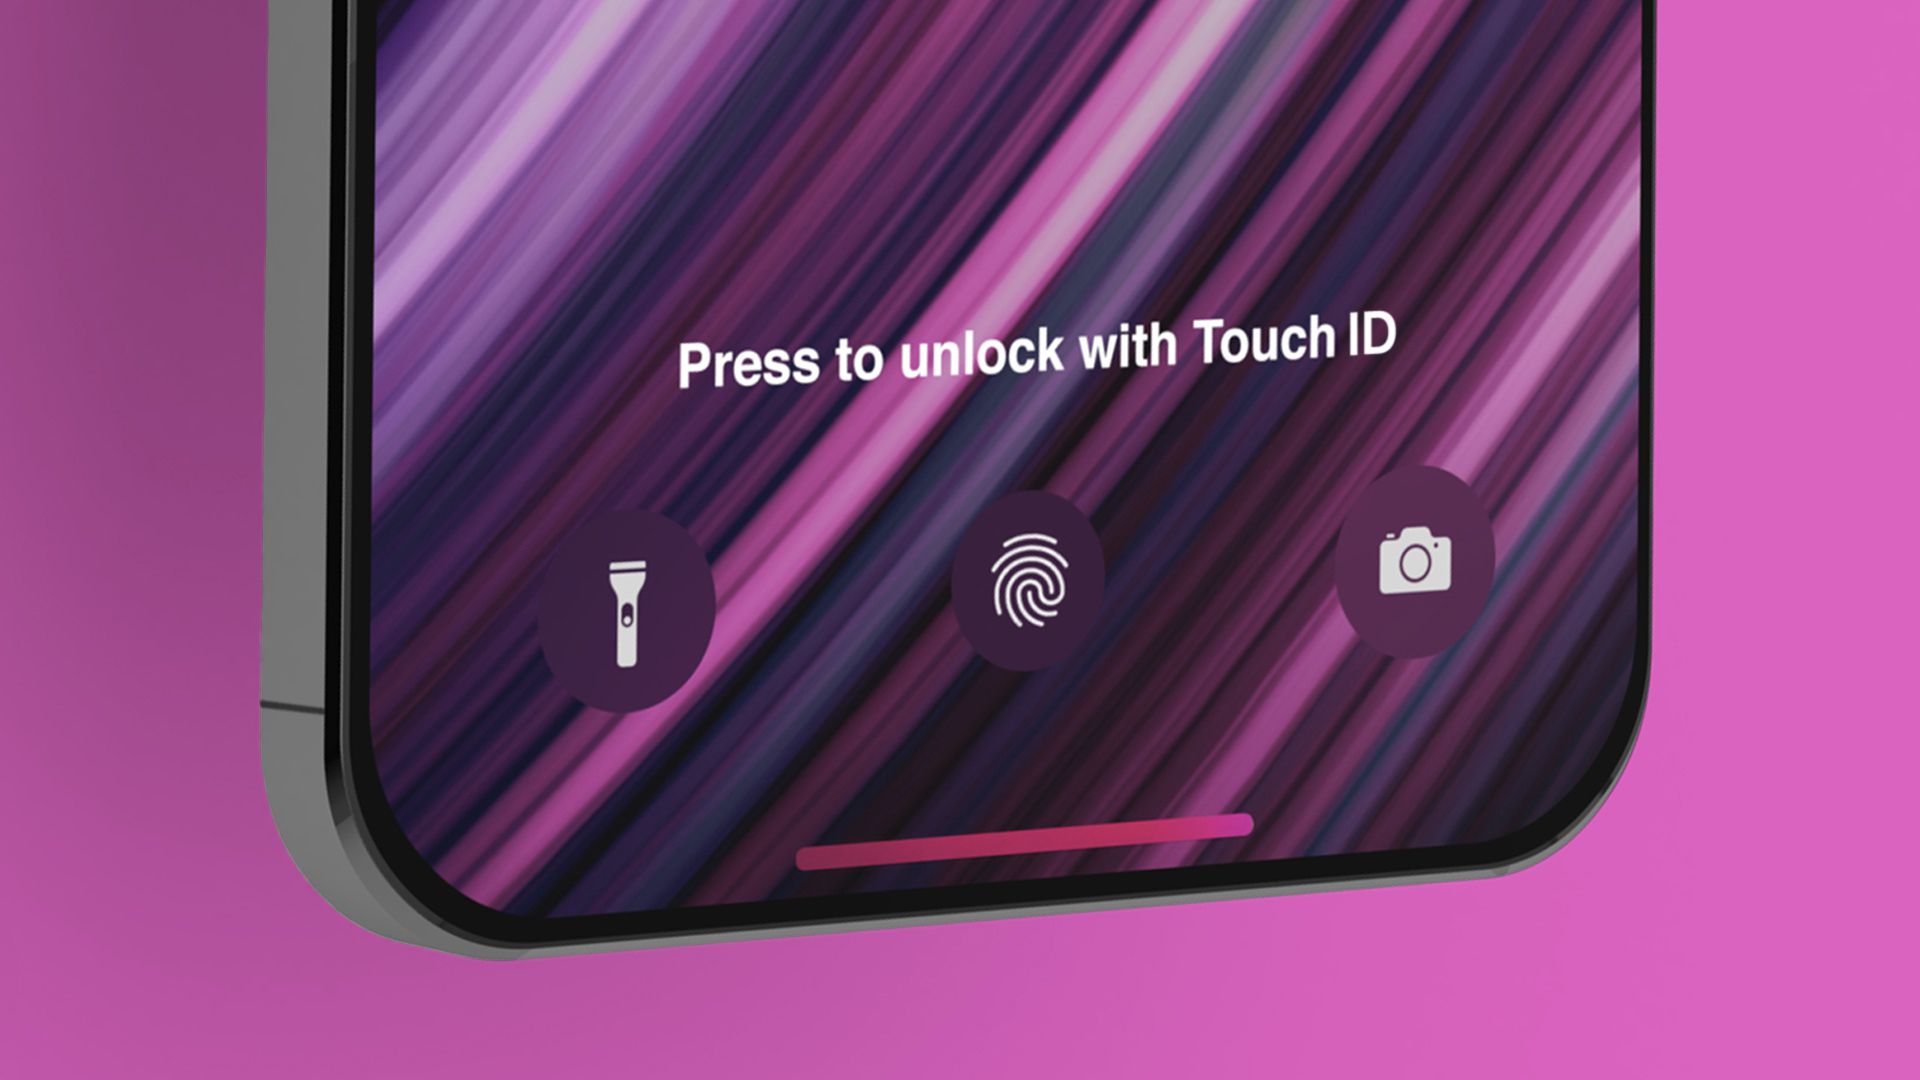 new-iphones-will-not-have-under-display-fingerprint-scanner-ming-chi-kuo